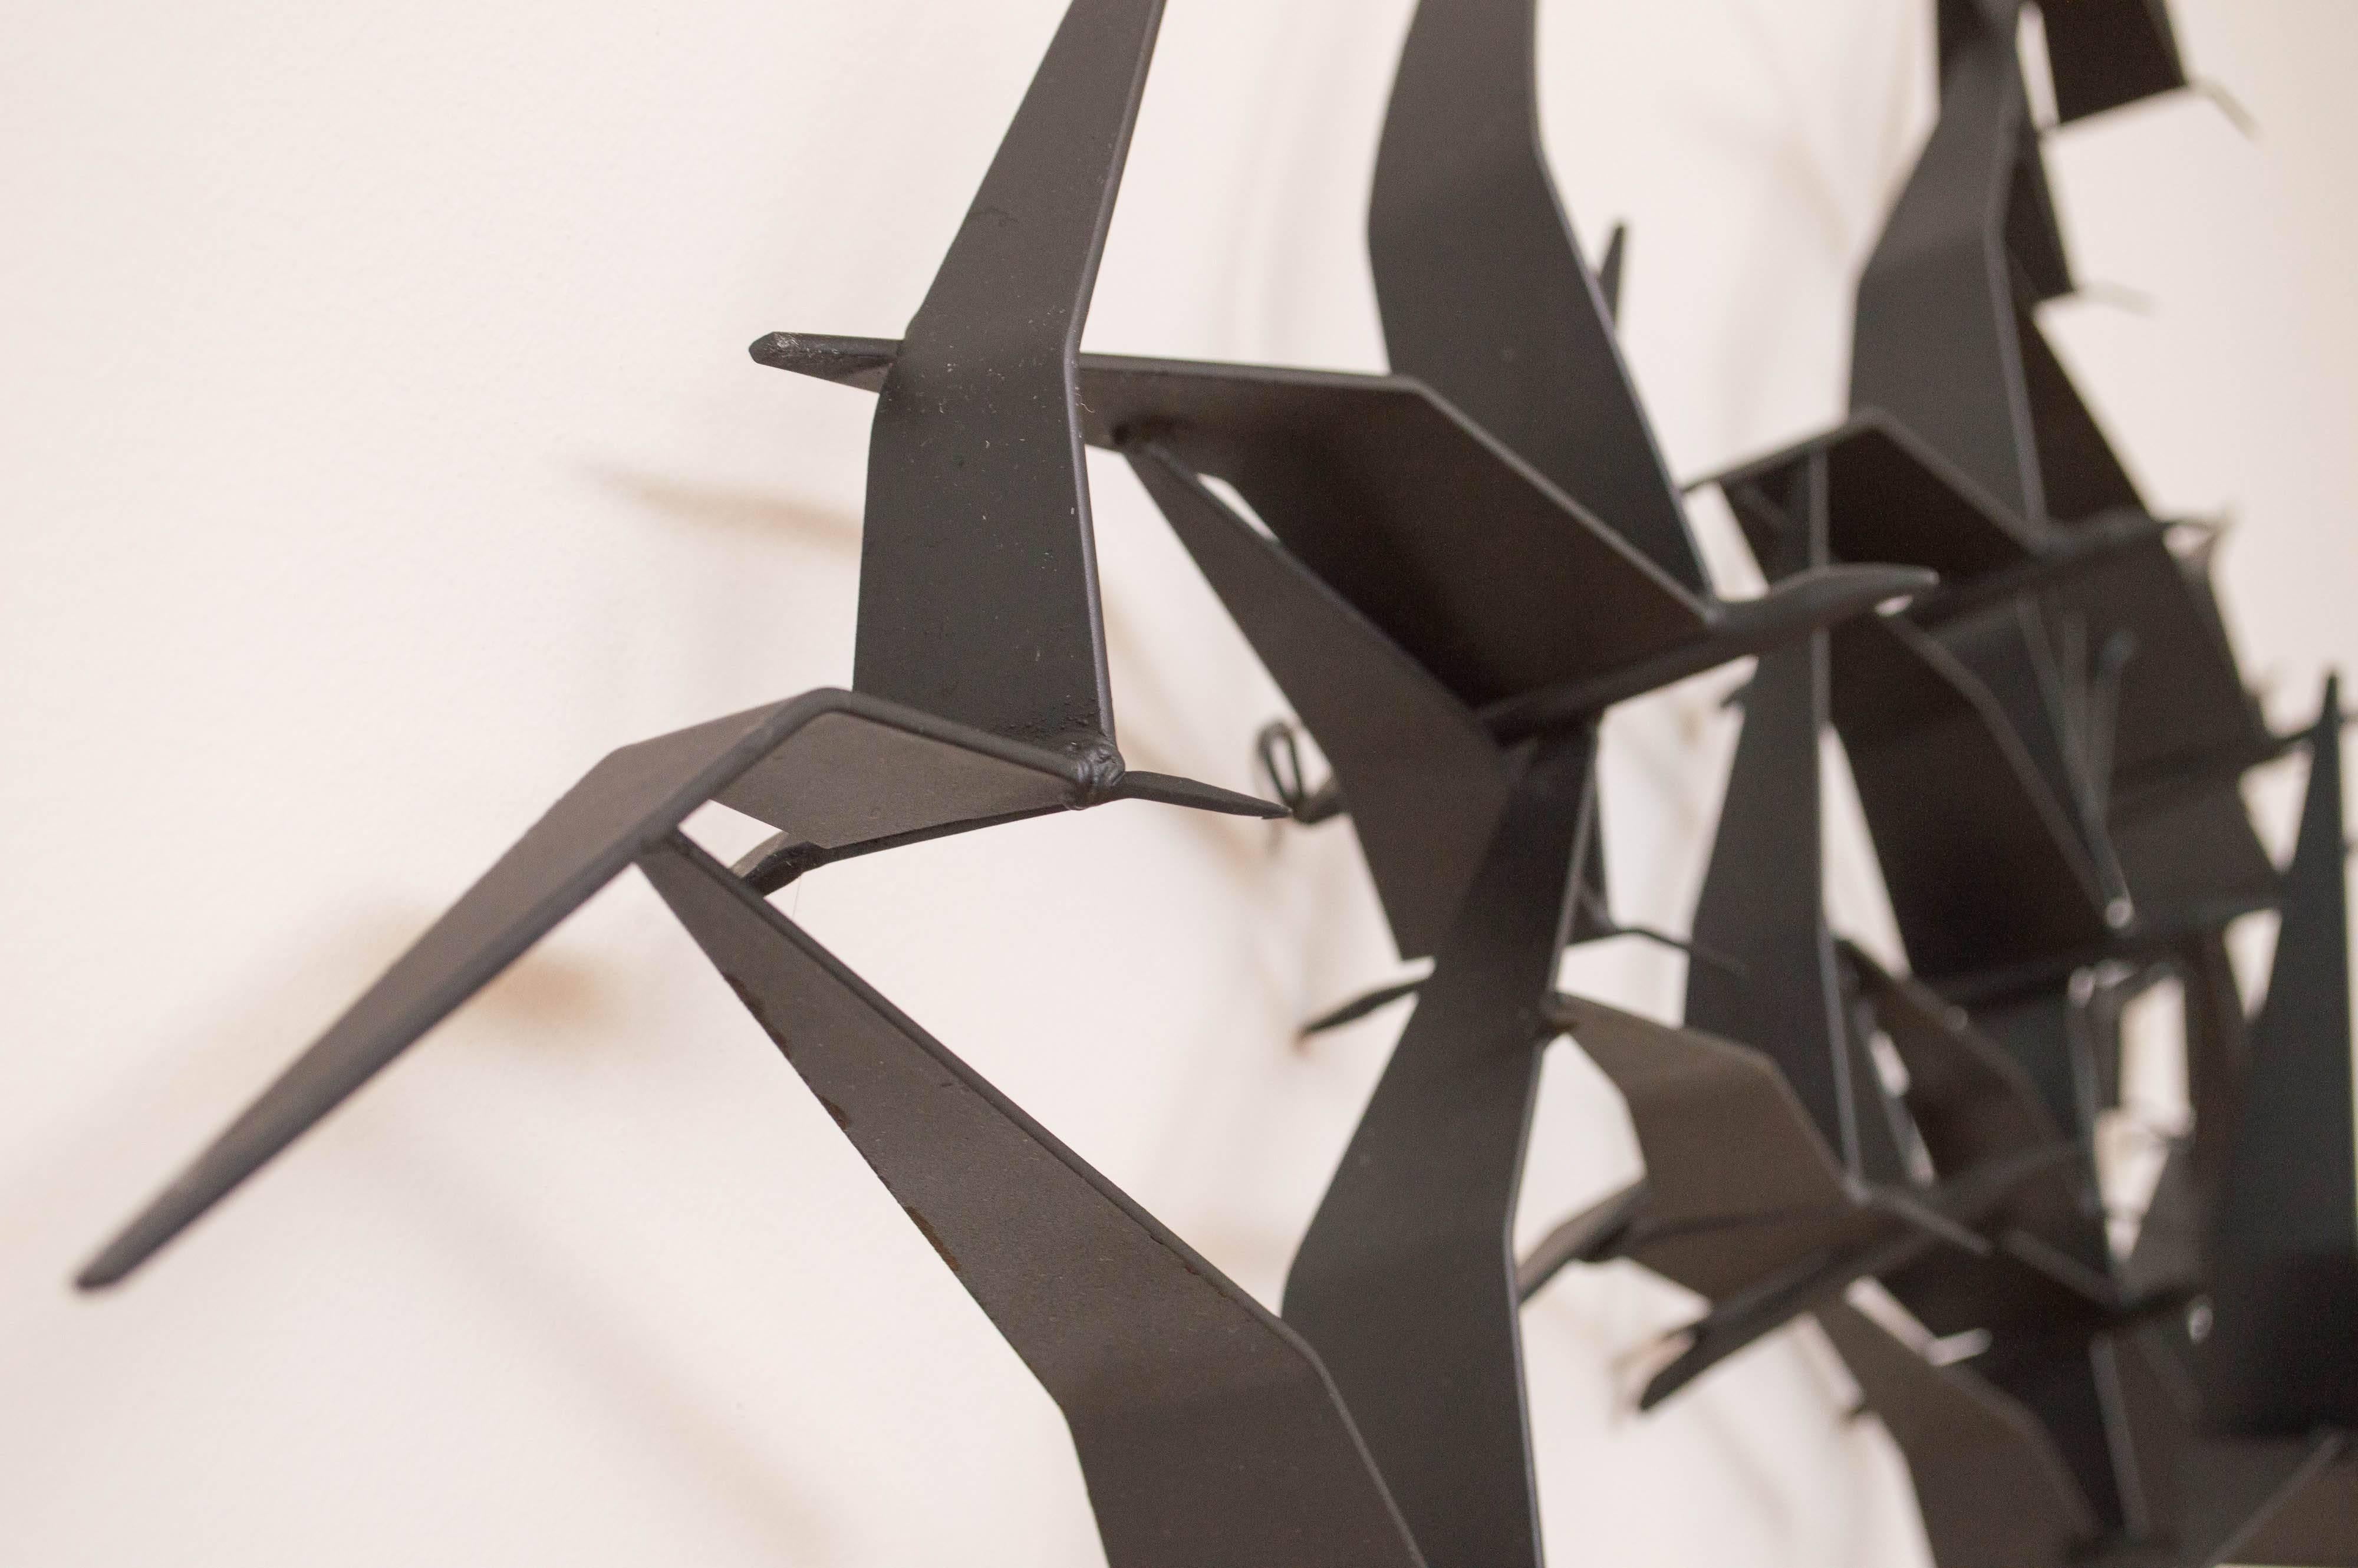 Black metal Birds in Flight a Curtis Jere wall sculpture, for Artisan House. Hangs up by two hooks
Classic C. Jere 